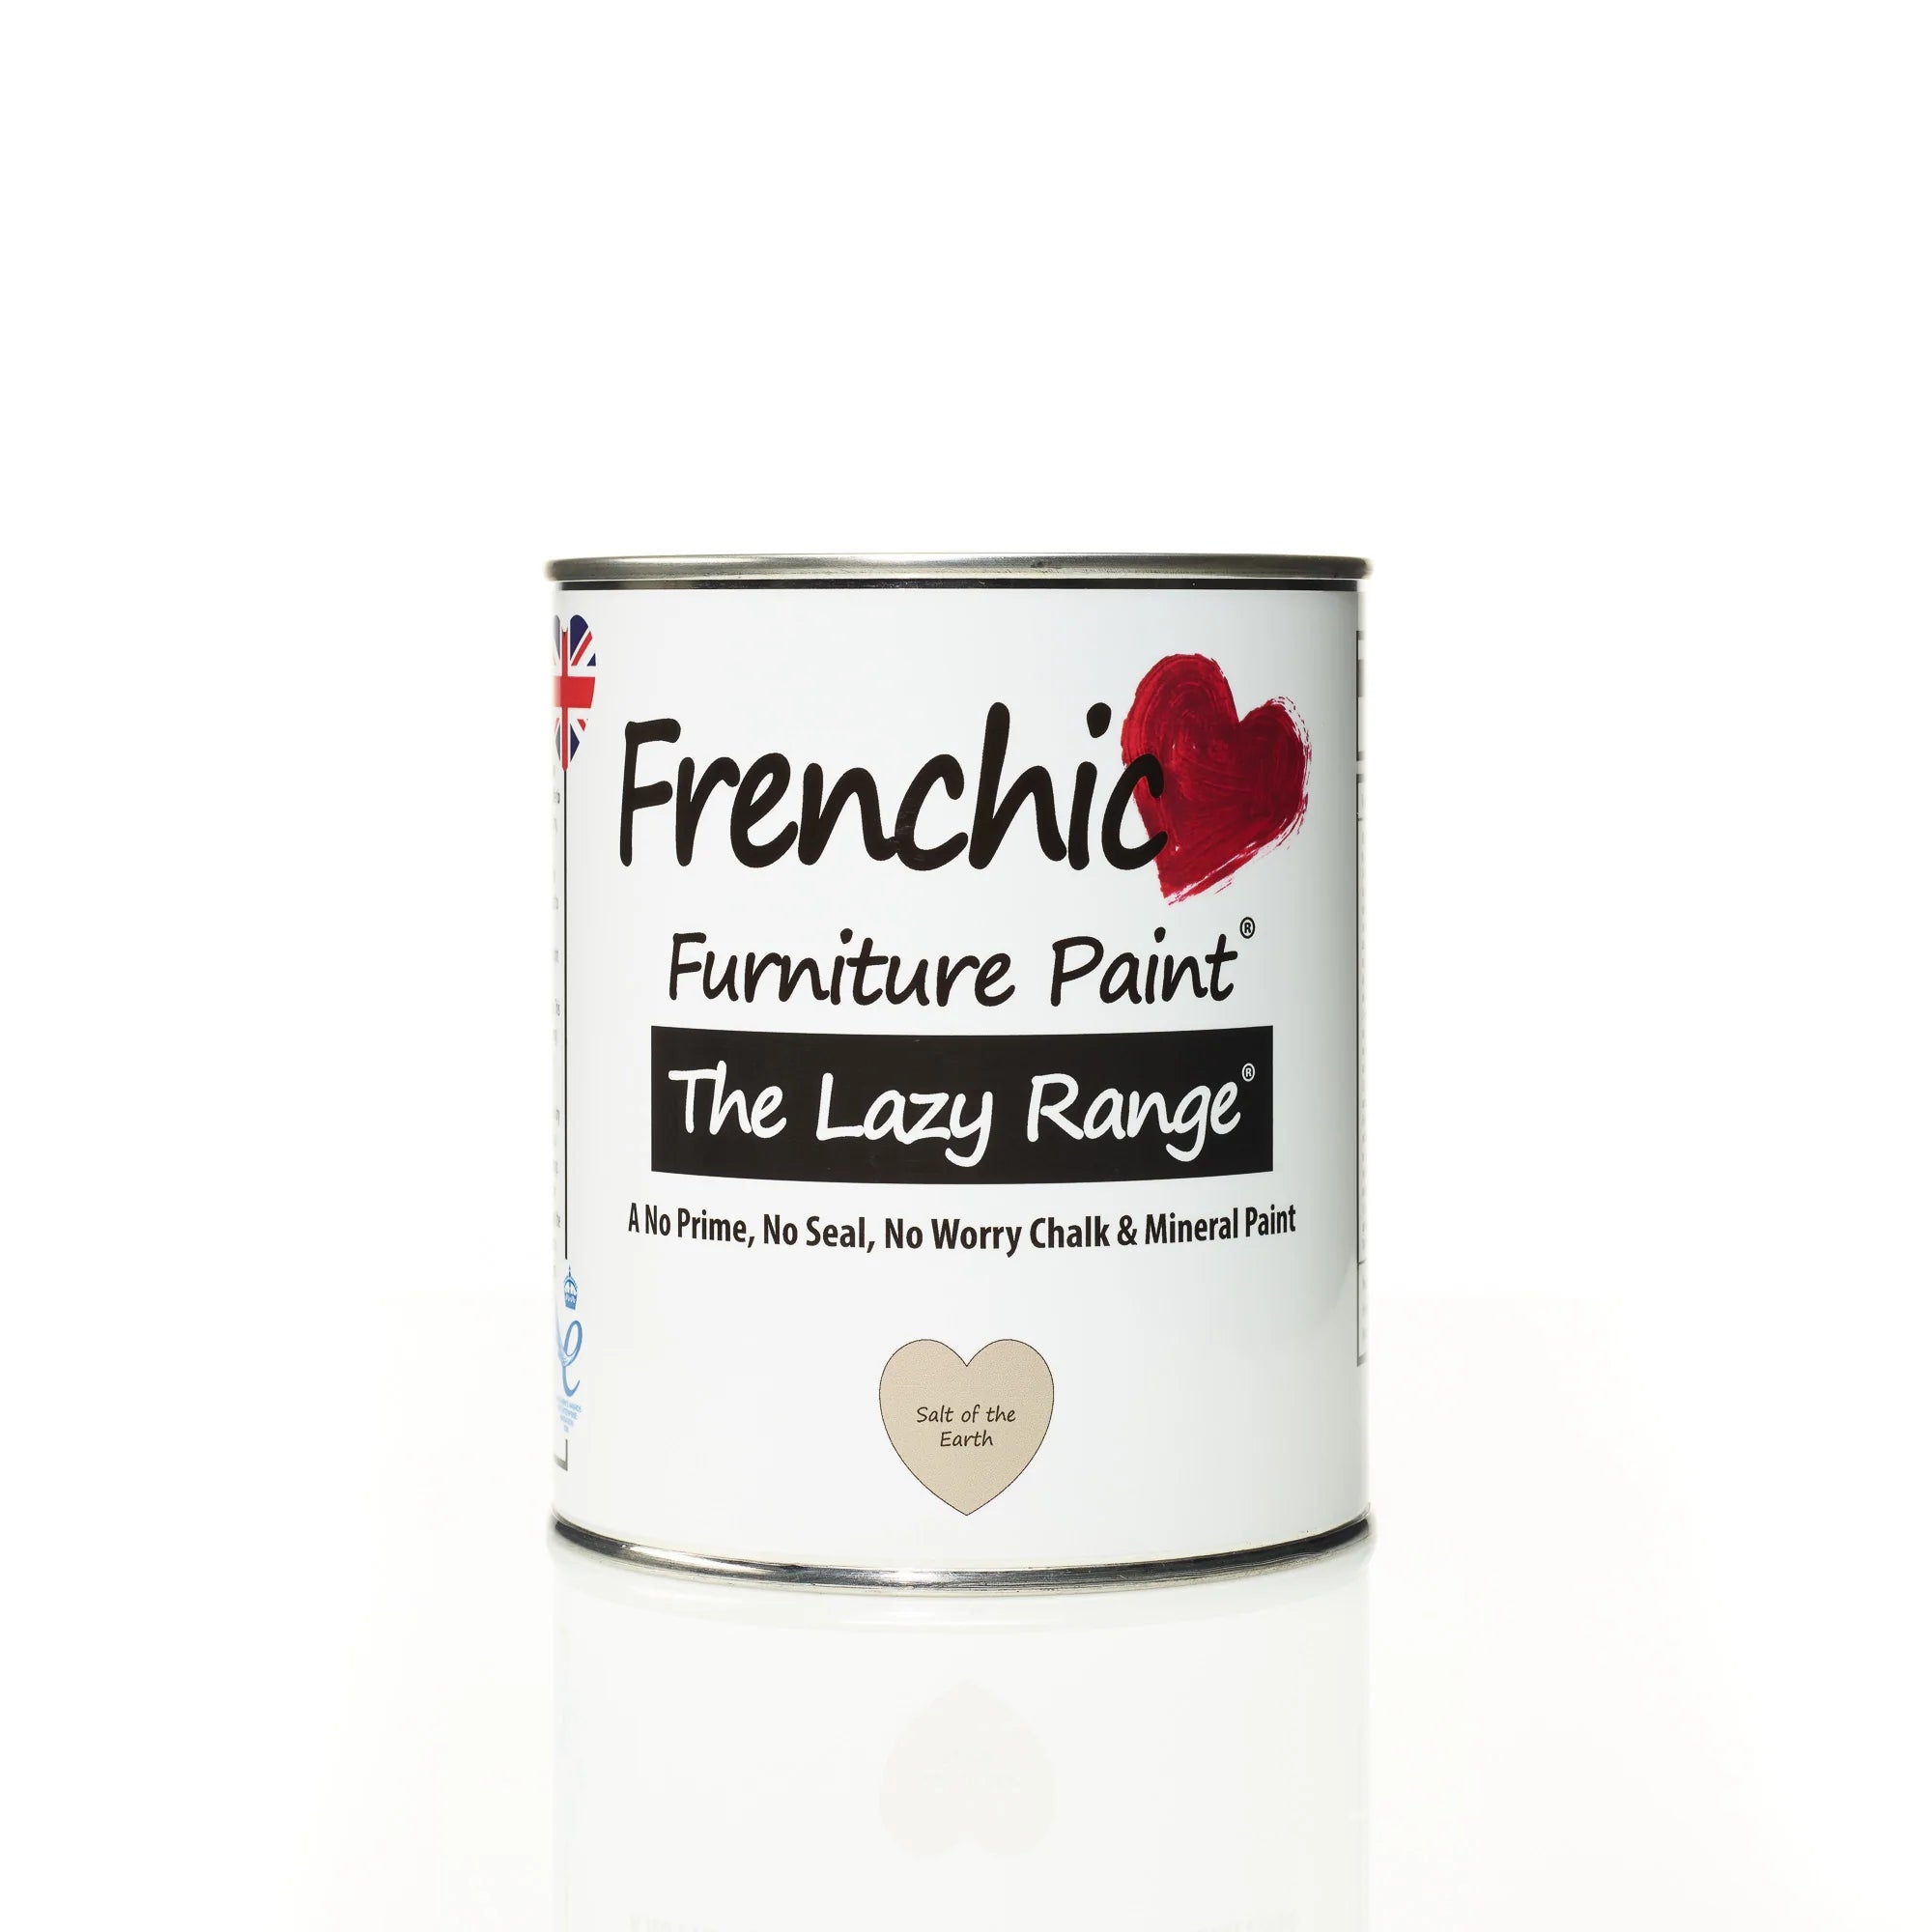 Frenchic Paint | Lazy Range - Salt of the Earth by Weirs of Baggot St